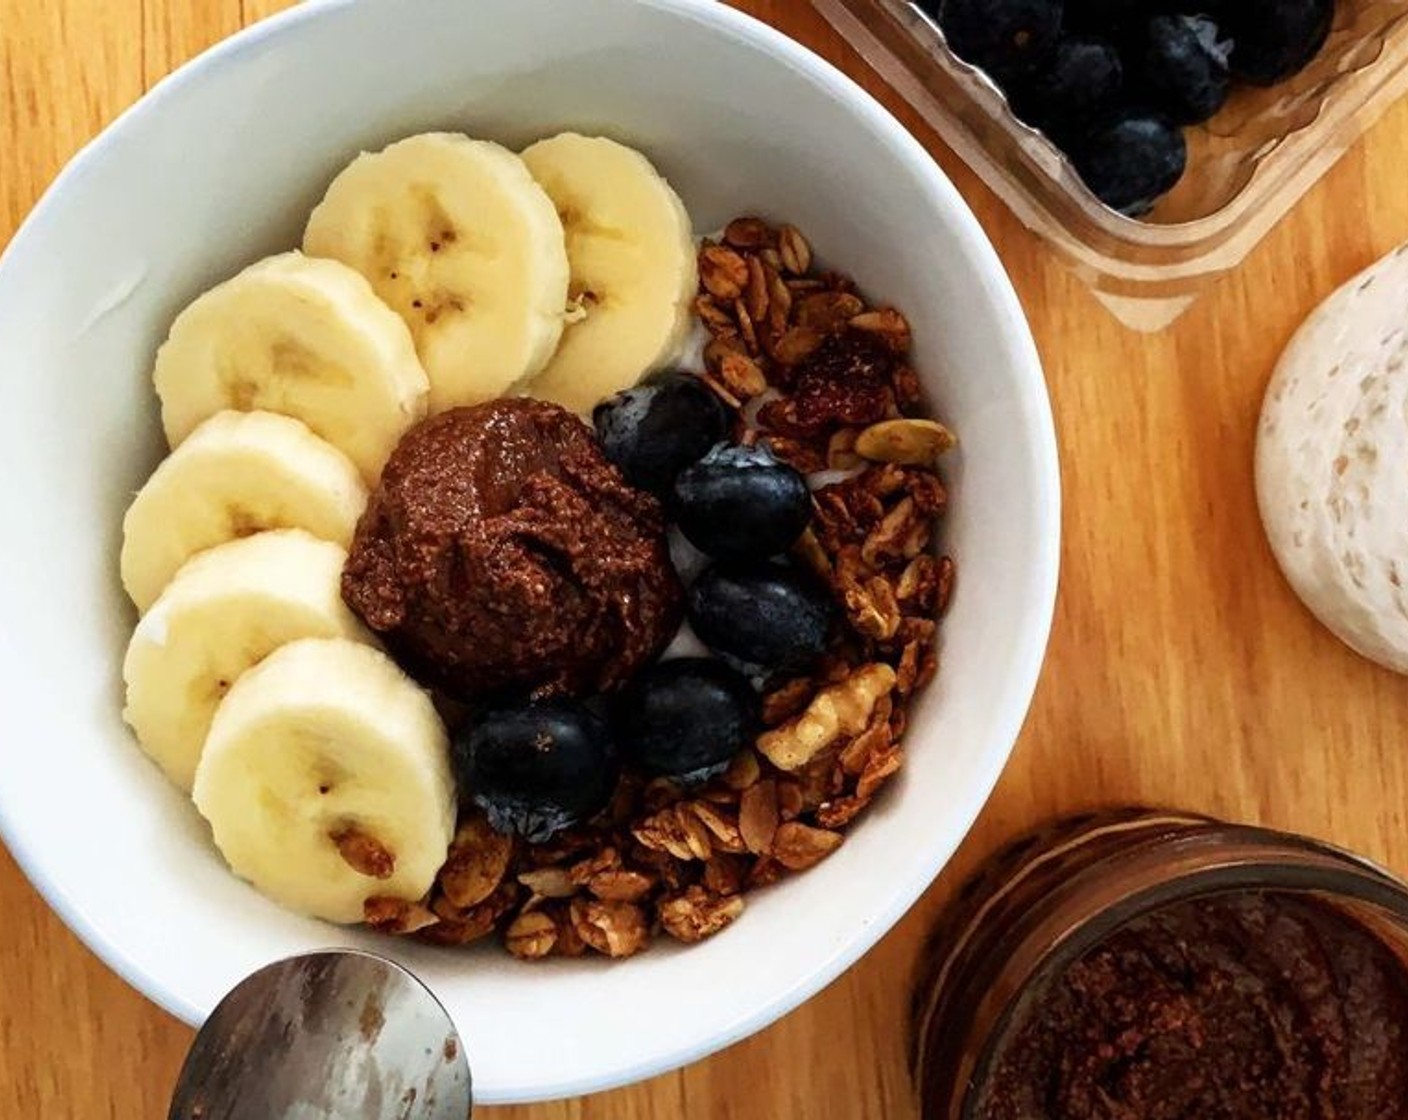 step 1 Take a large bowl and add in Unsweetened Coconut Yogurt (to taste), then top it off with some Granola (to taste), Bananas (to taste), Fresh Blueberries (to taste) and a spoon of Chocolate Almond Butter (1 Tbsp).